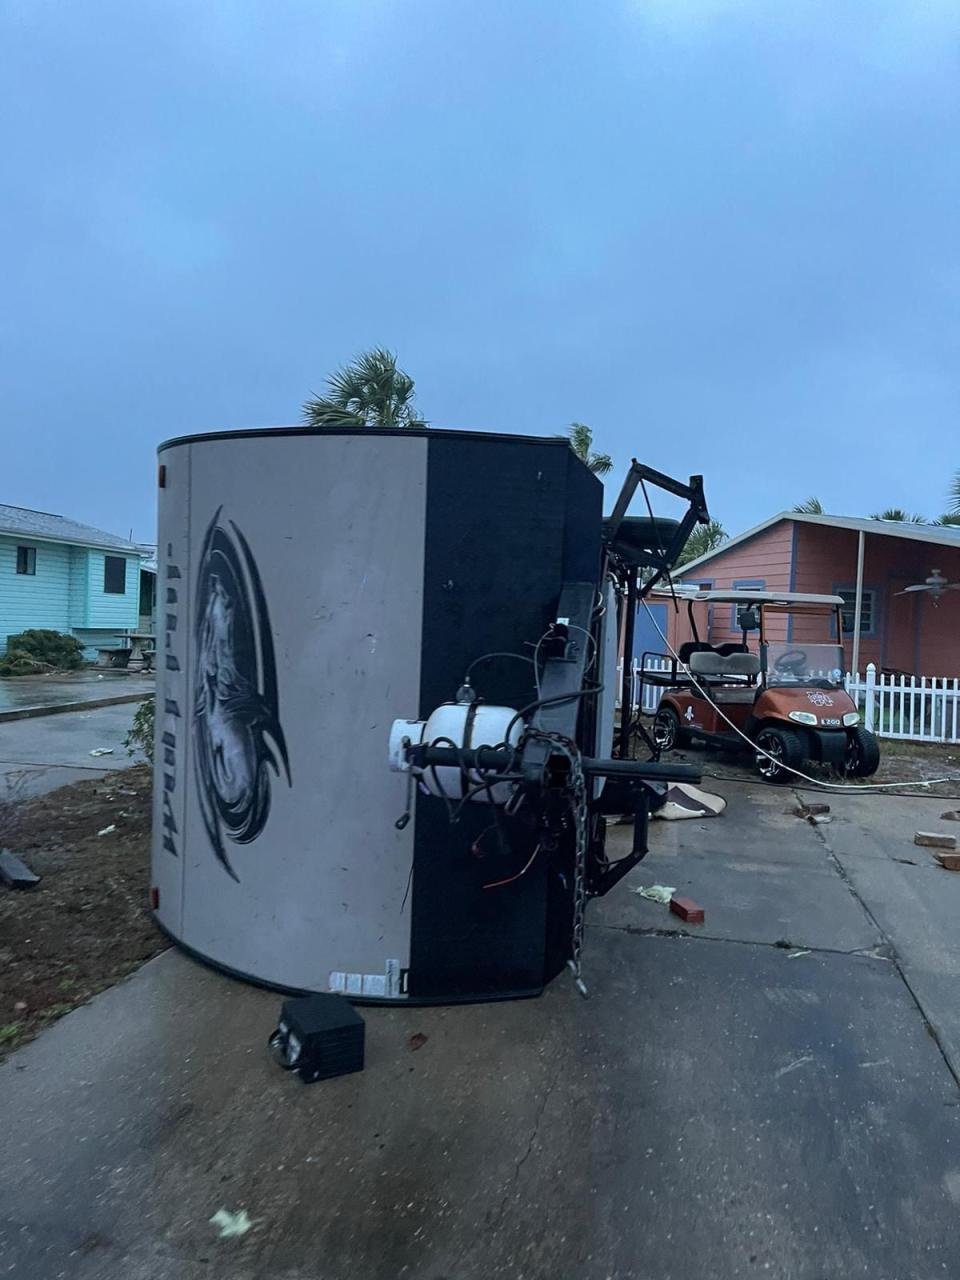 The Bay County Sheriff's Office shared images of storm destruction from the Florida Panhandle.